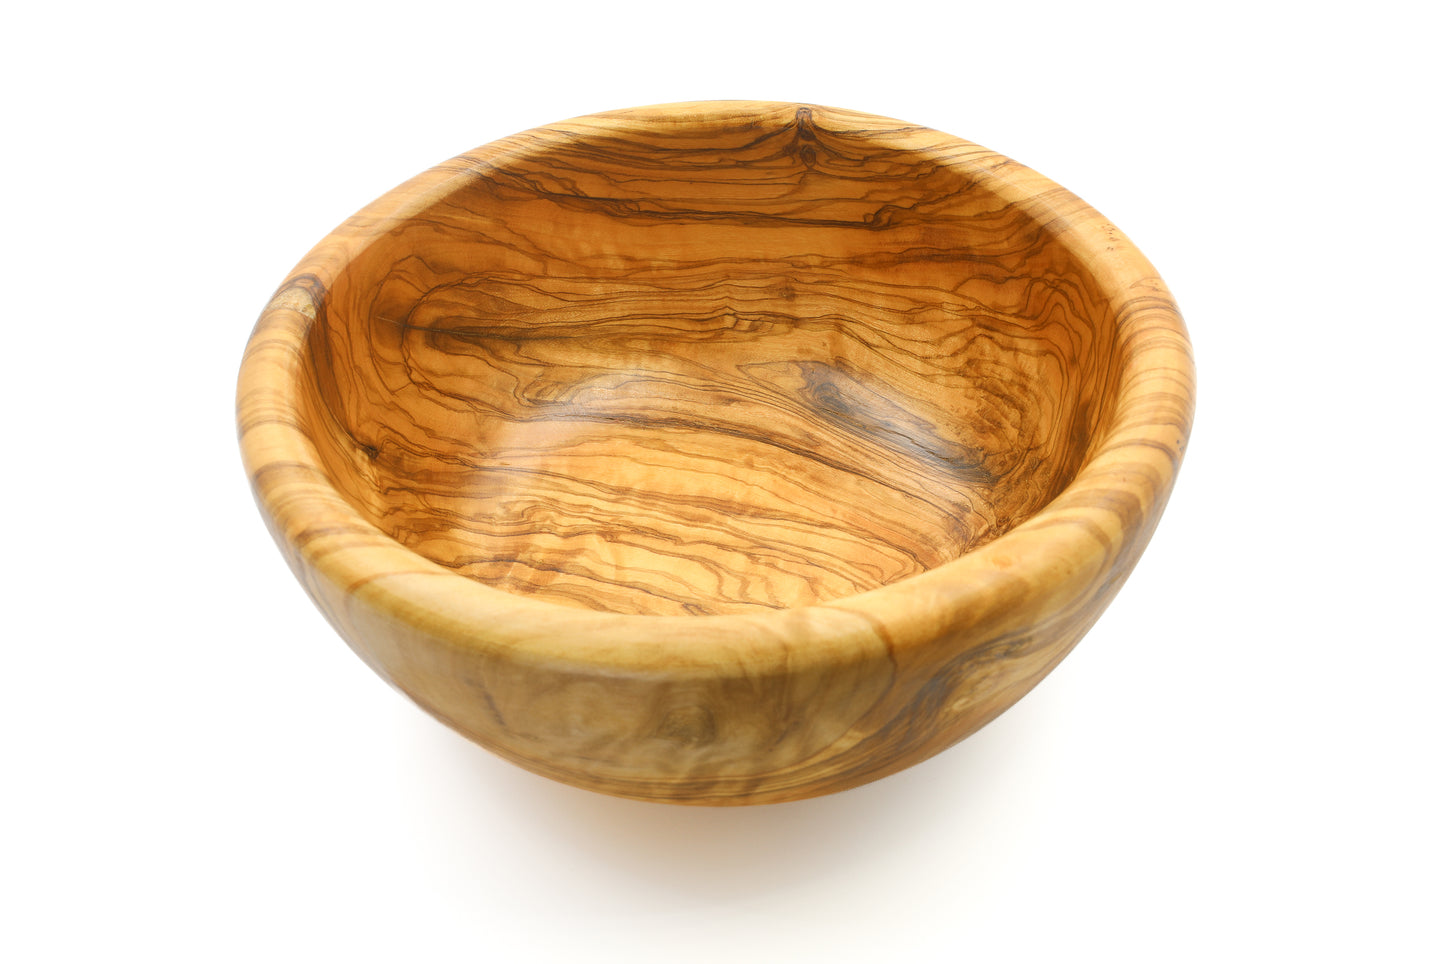 Beautifully crafted round olive wood dishes